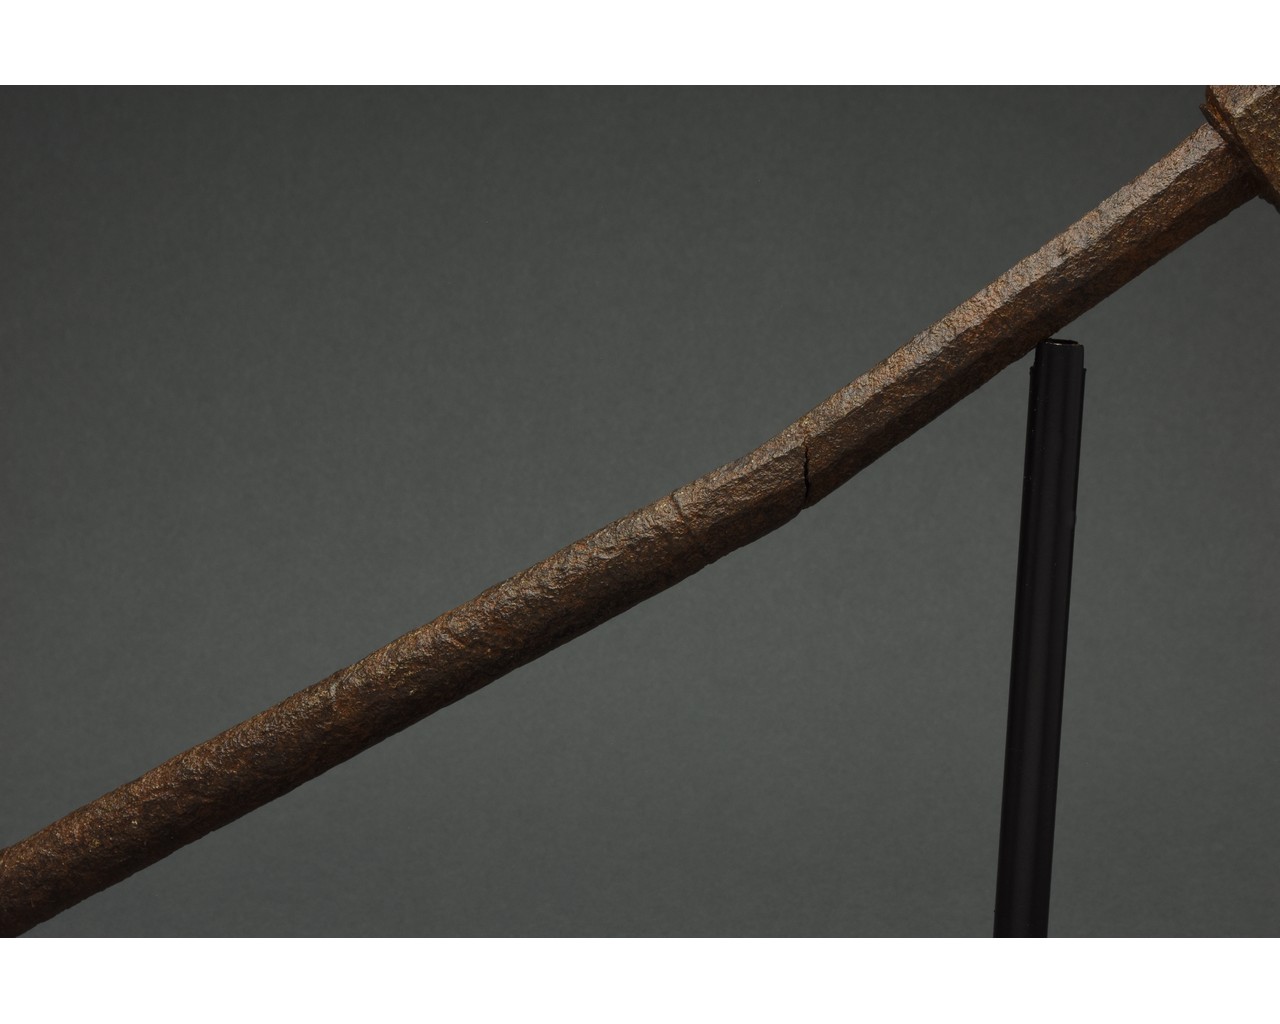 MEDIEVAL BATTLE AXE AND HAMMER WITH HANDLE - Image 4 of 7